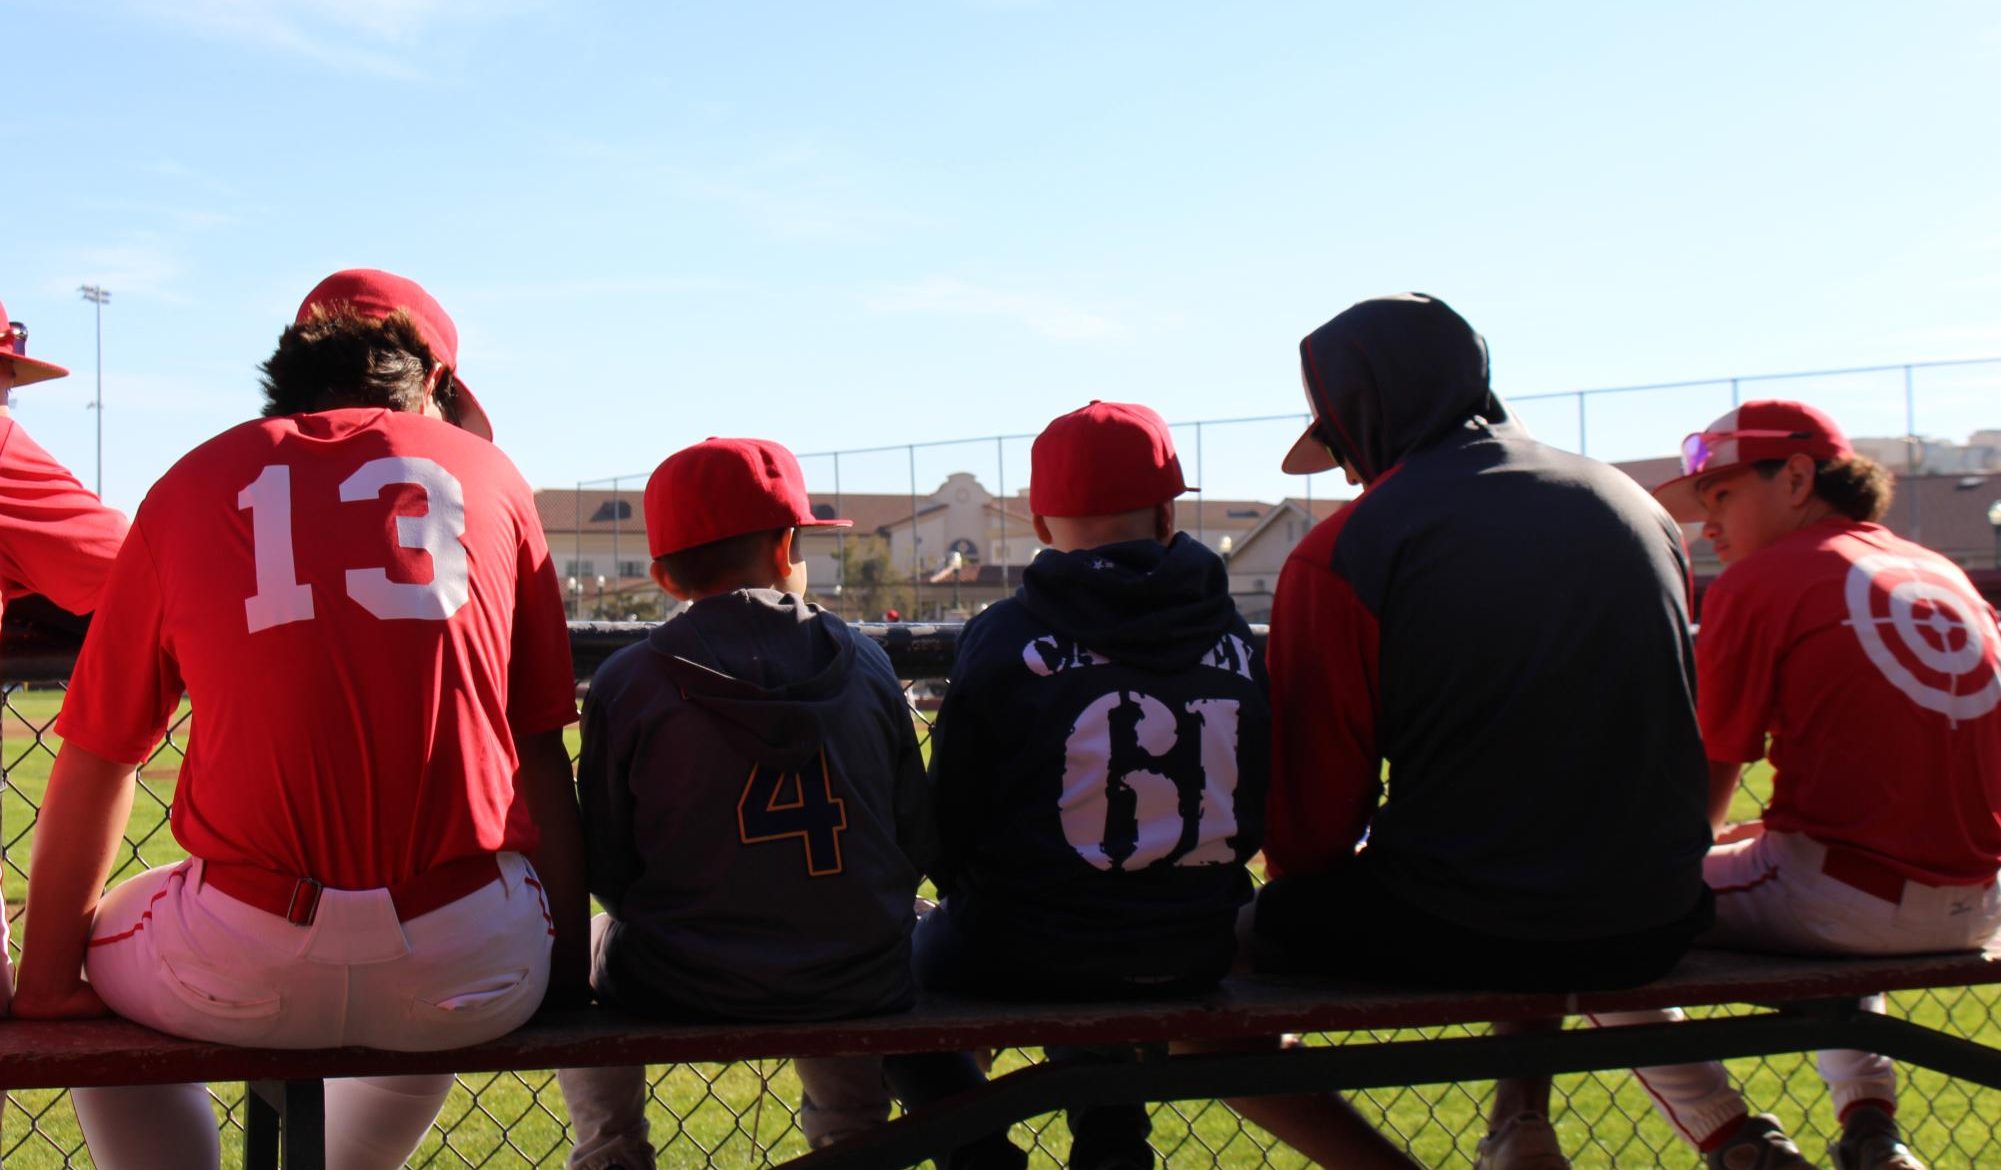 In the dugout, Easton Arceo (left) and Mikah Carney (right) talk with the FUHS baseball team. A lot of their conversations were about common interests such as food and sports. The team even included the boys in chirping the opponent team.